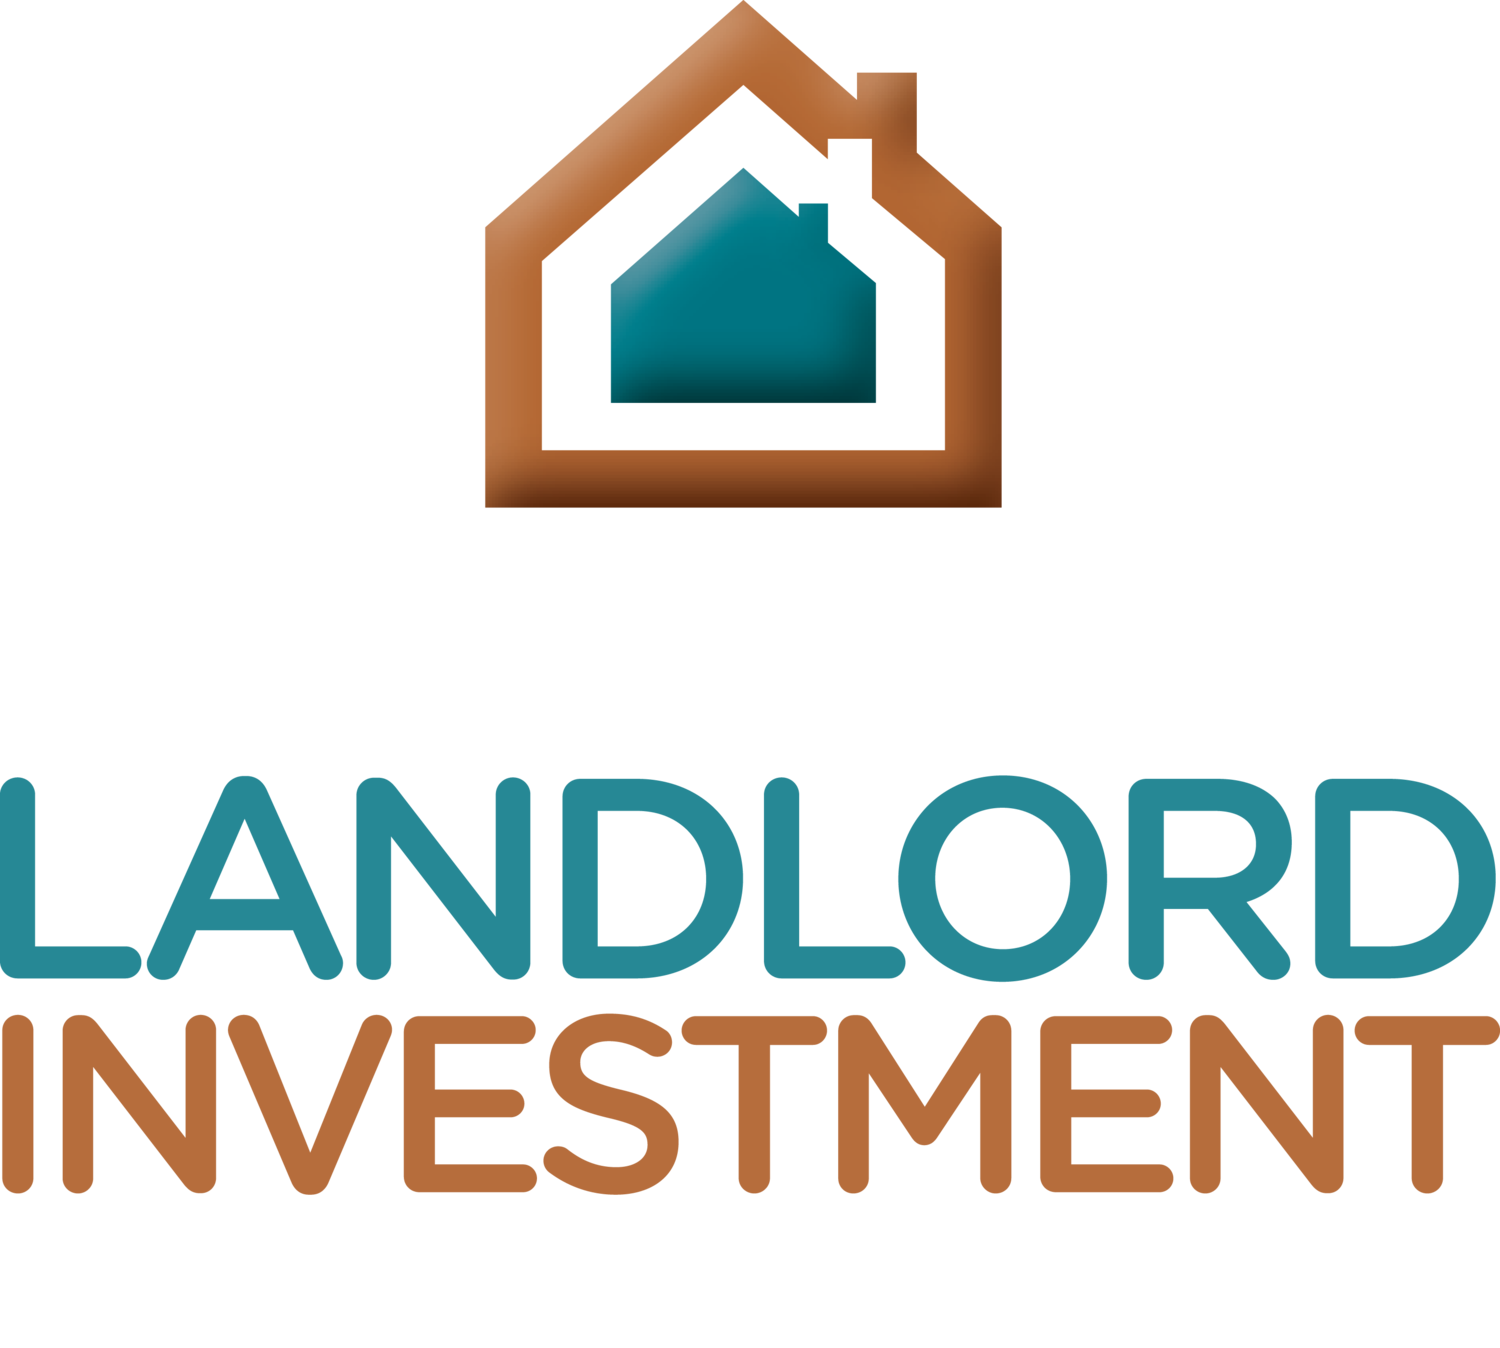 The National Landlord Investment Show - London